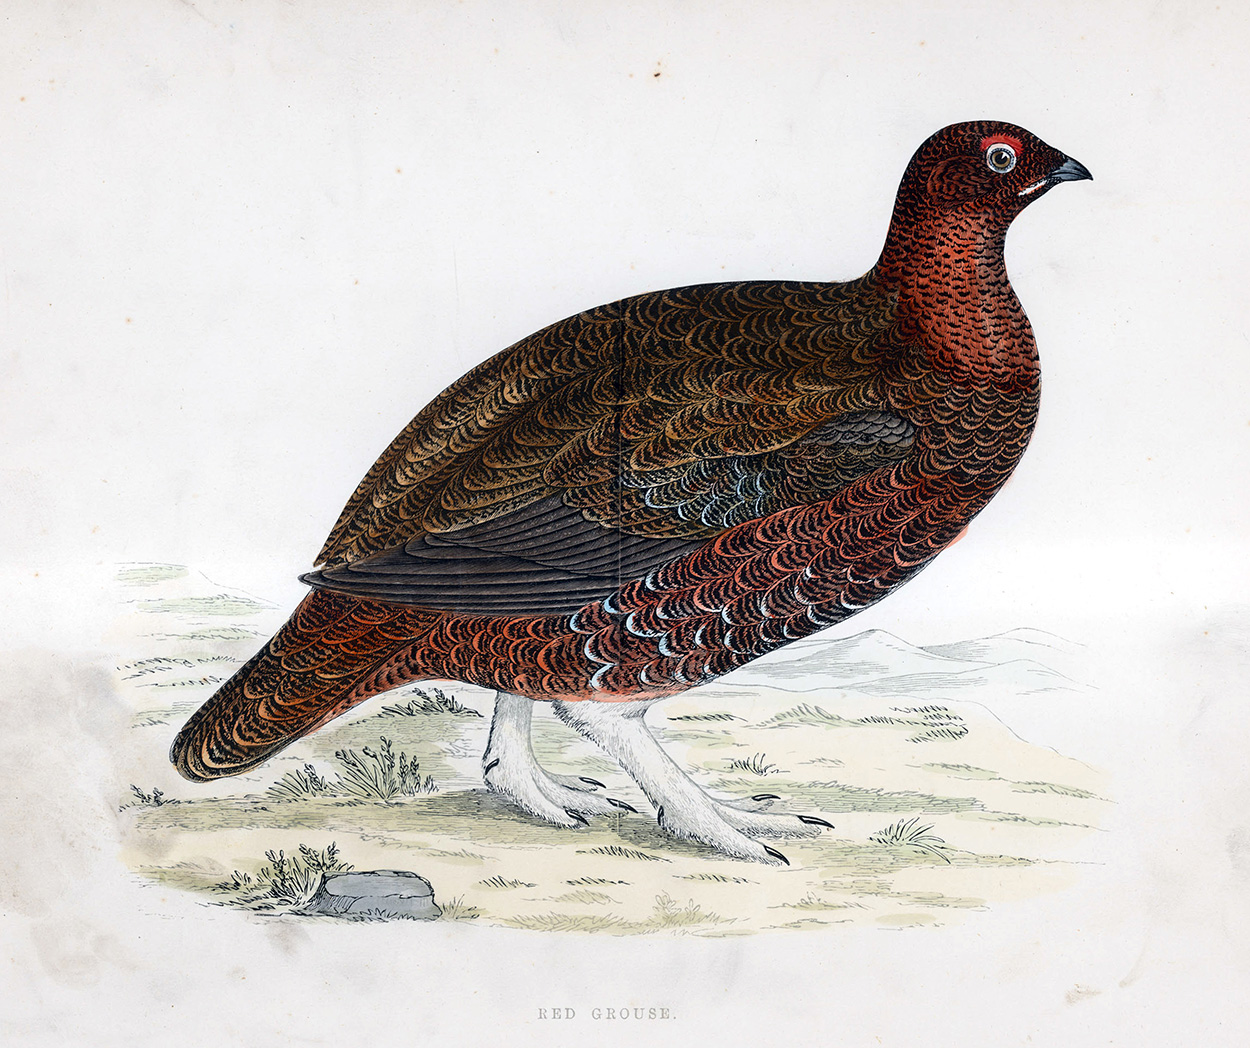 Red Grouse - hand coloured lithograph 1891 (Print) art by Beverley R Morris Art at The Illustration Art Gallery